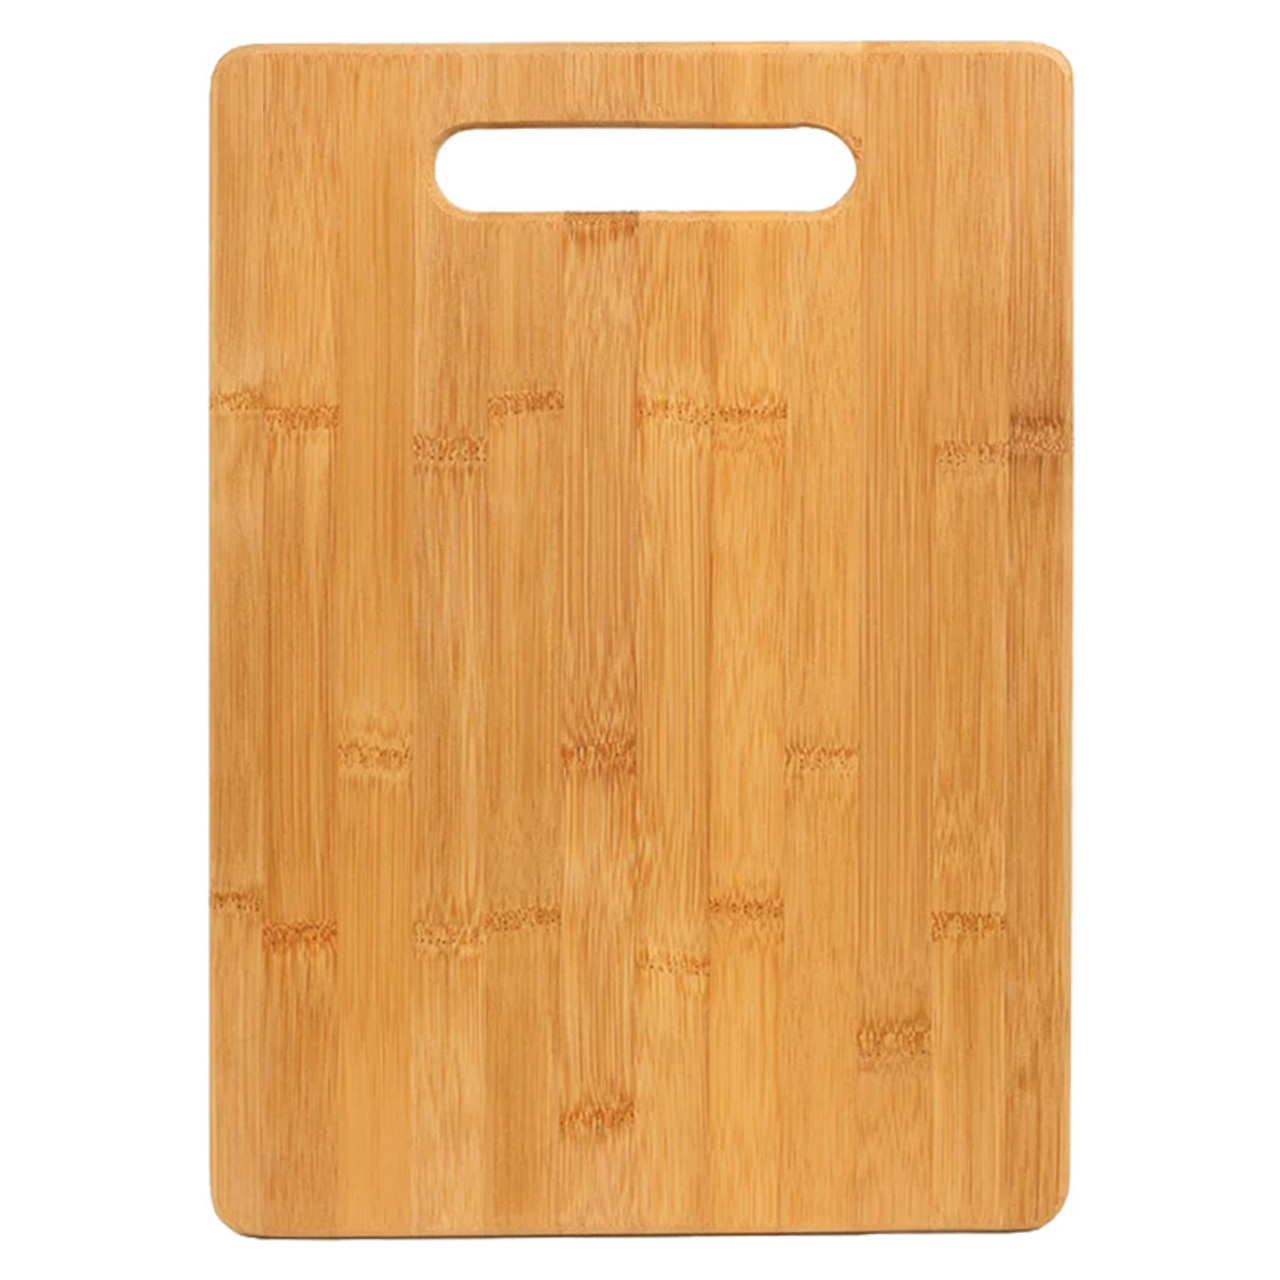 https://cdn11.bigcommerce.com/s-d22a0/images/stencil/1280x1280/products/2401/12207/bamboo-cutting-board__20567.1656368755.jpg?c=2